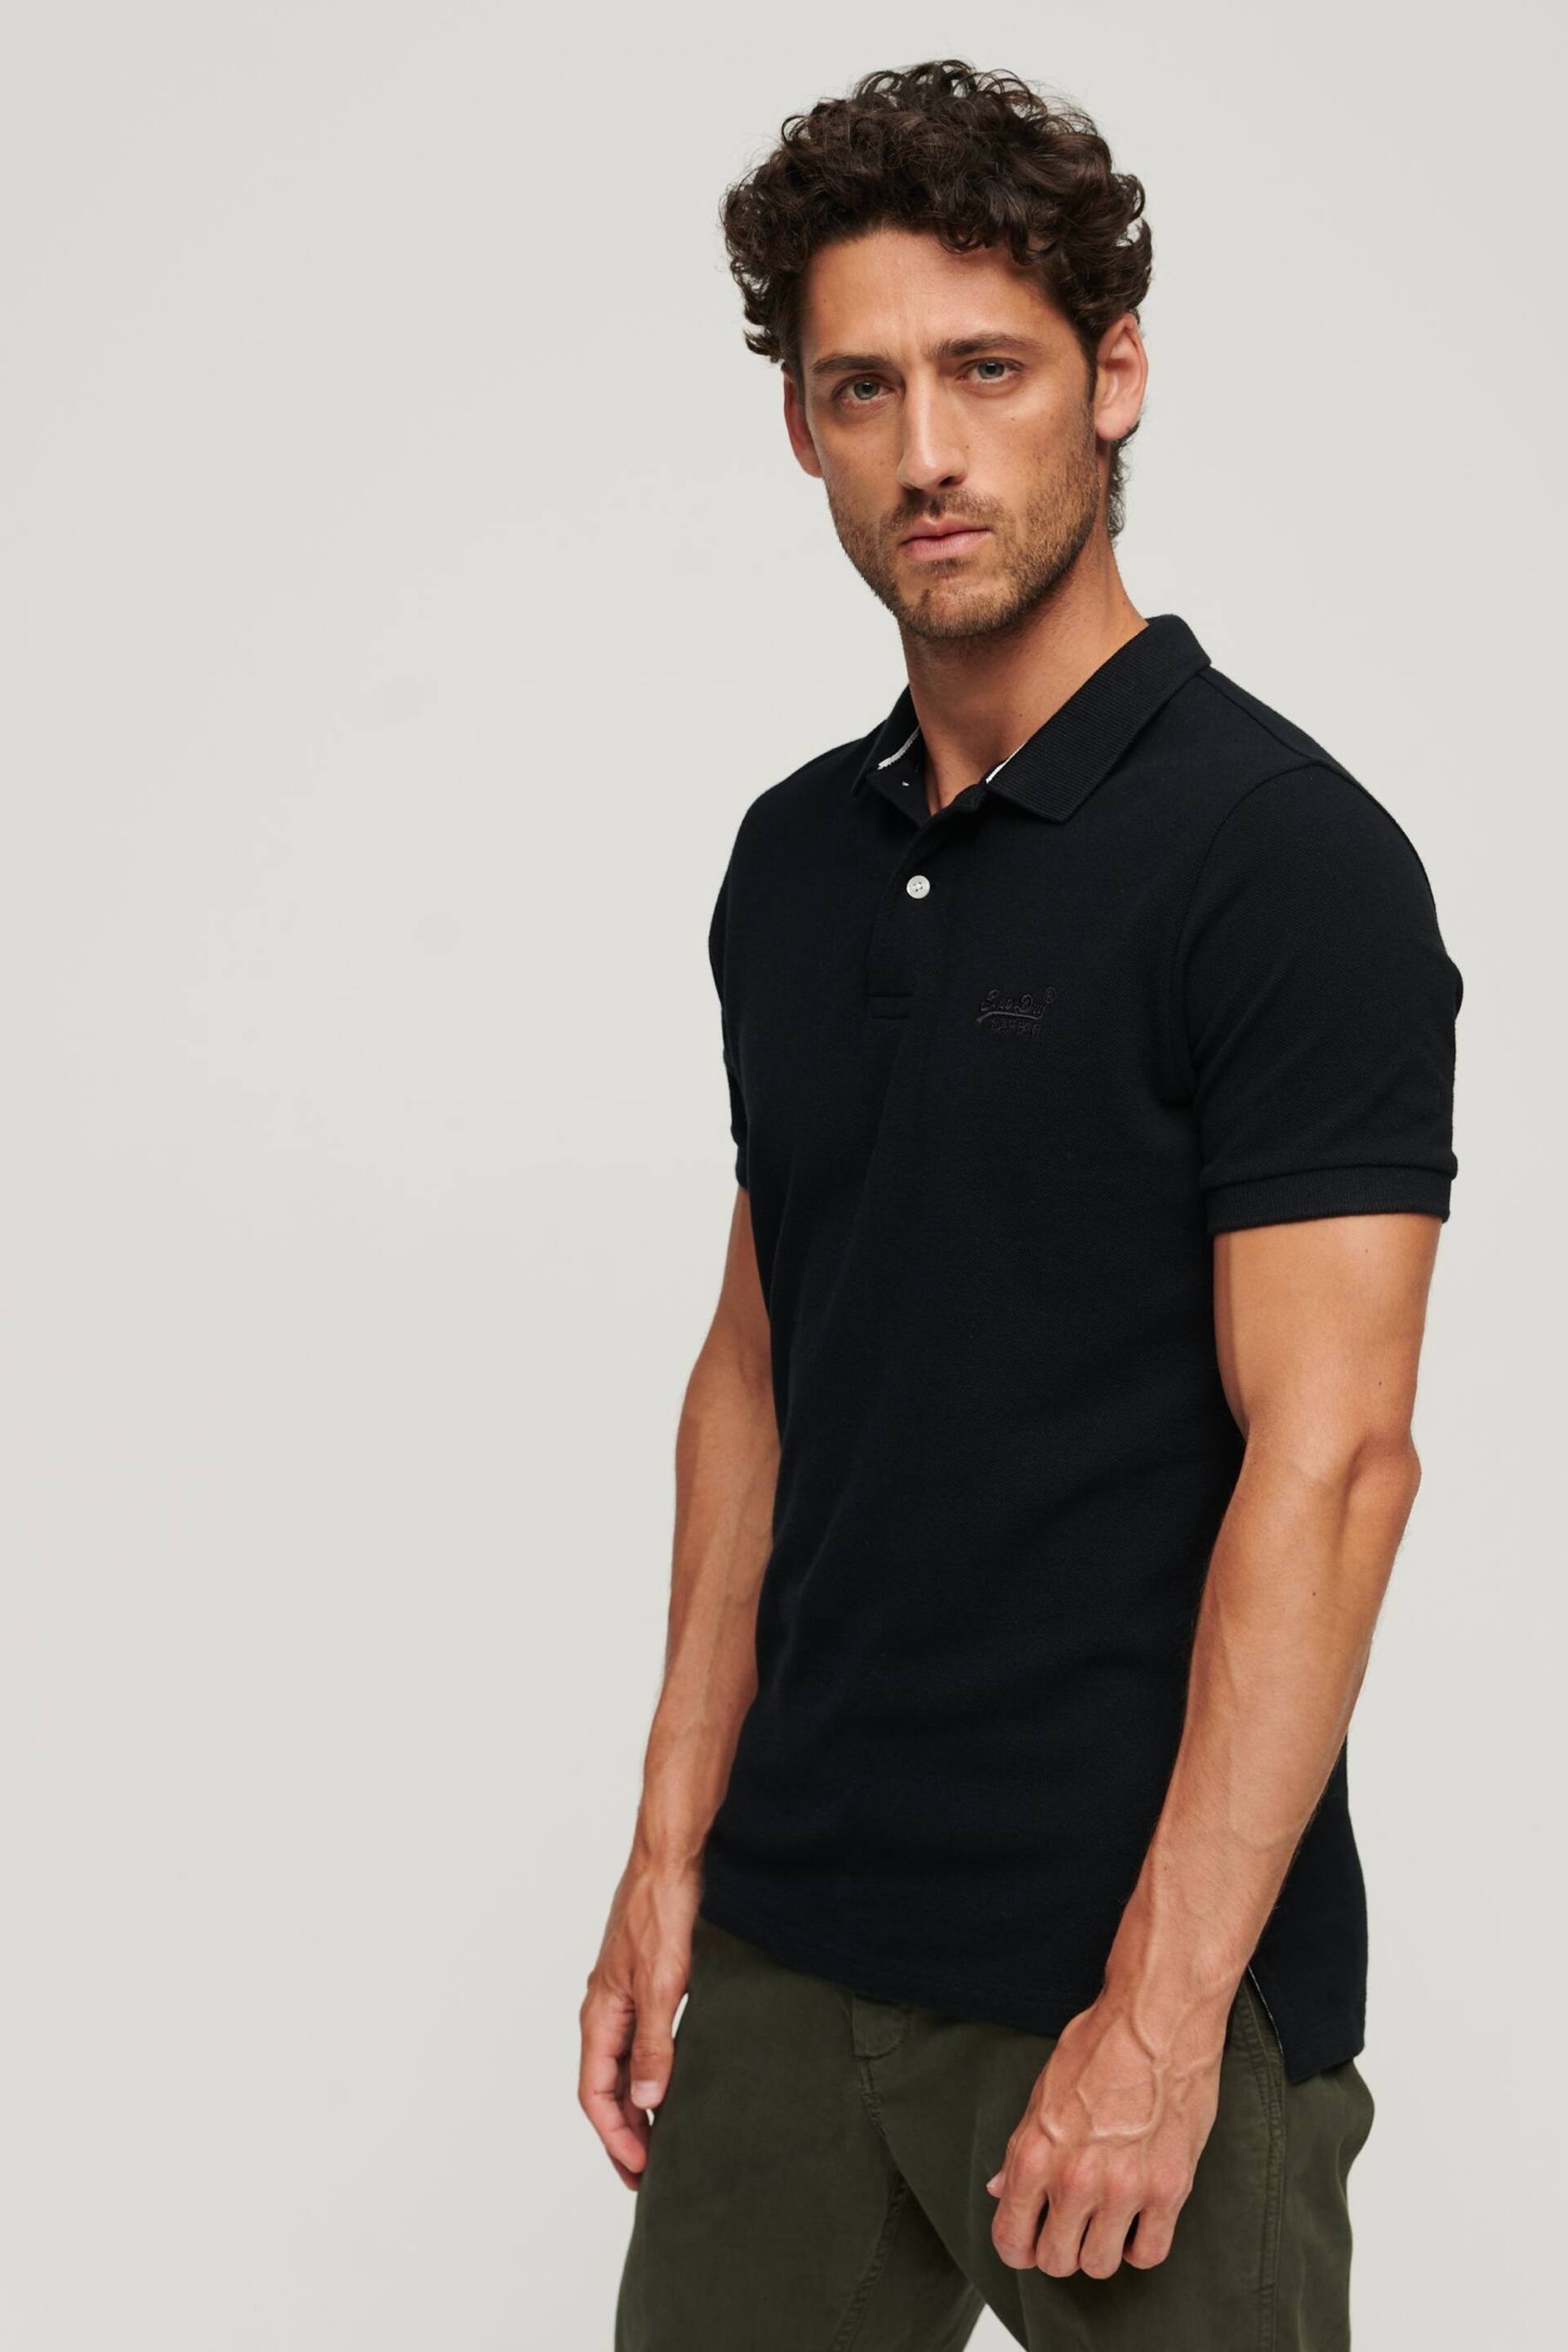 Superdry Black Classic Pique Polo Shirt - Image 1 of 9